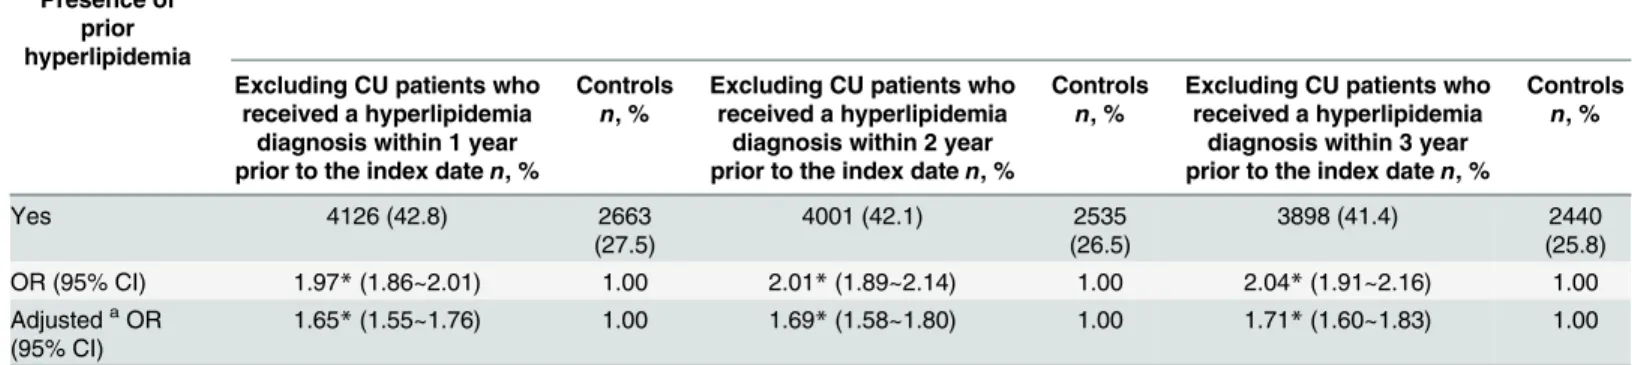 Table 3 presents the sensitivity analysis of the relationship between CU and prior hyperlip- hyperlip-idemia